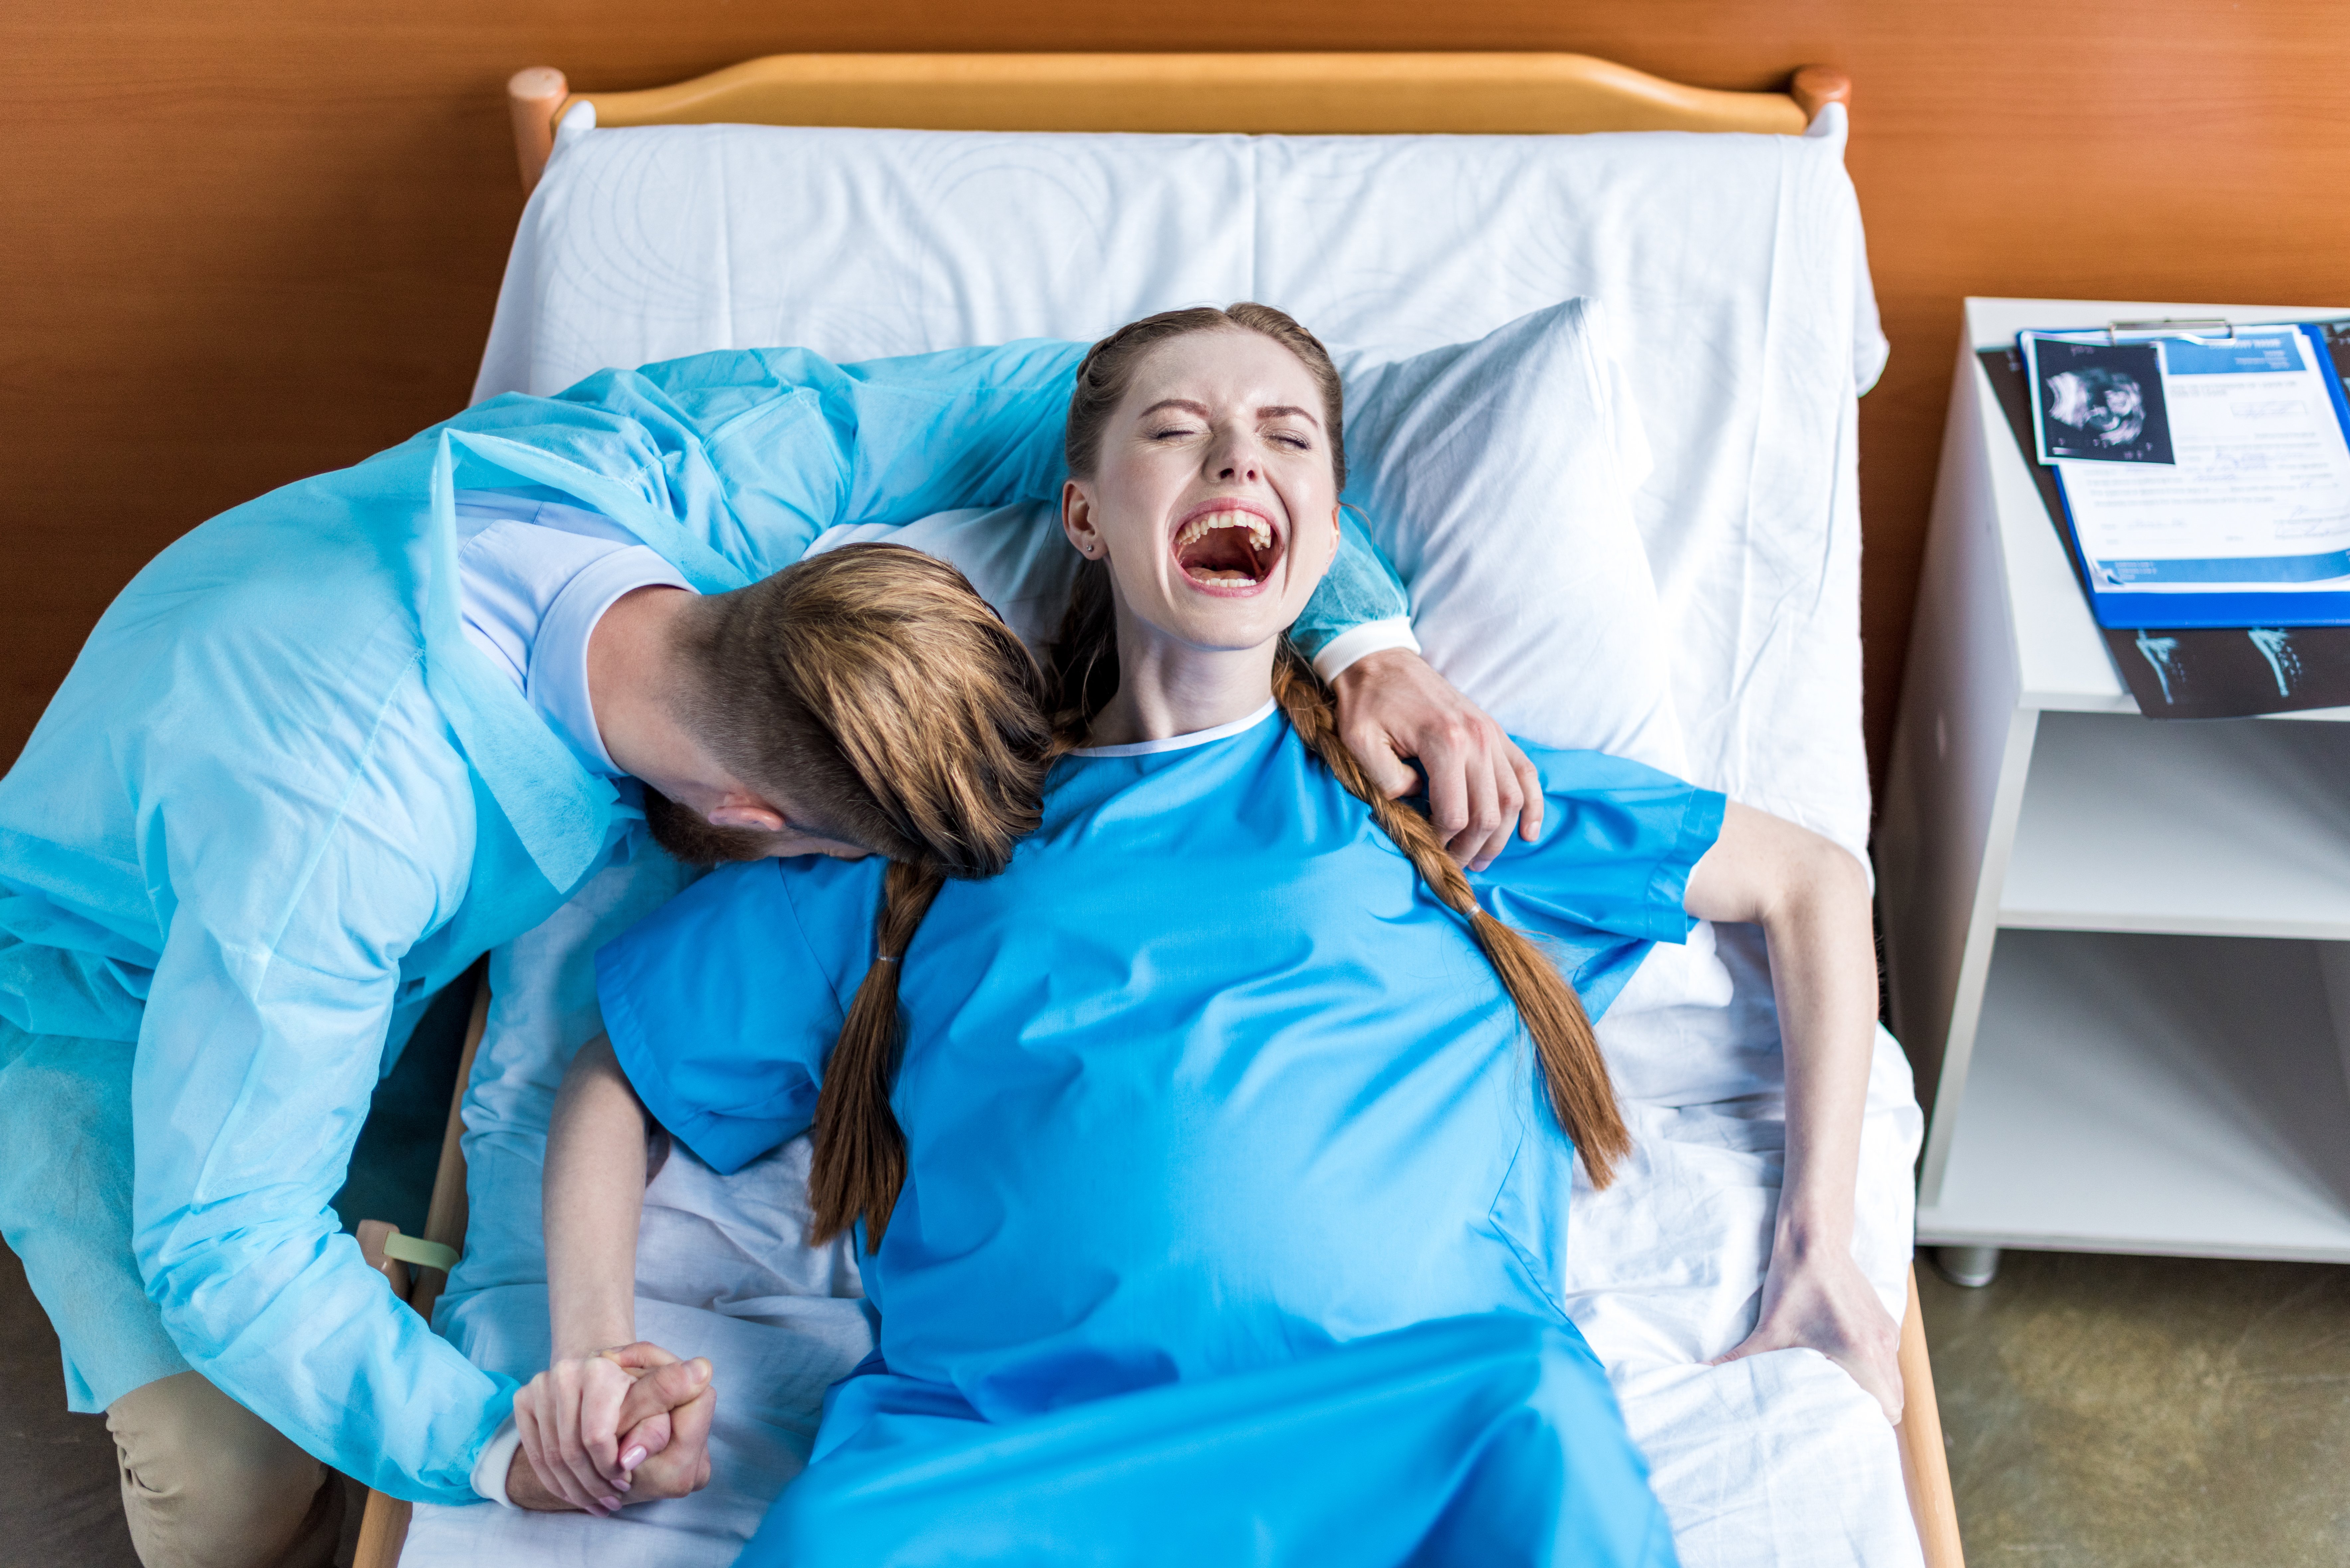 A woman giving birth in a hospital | Photo: Shutterstock